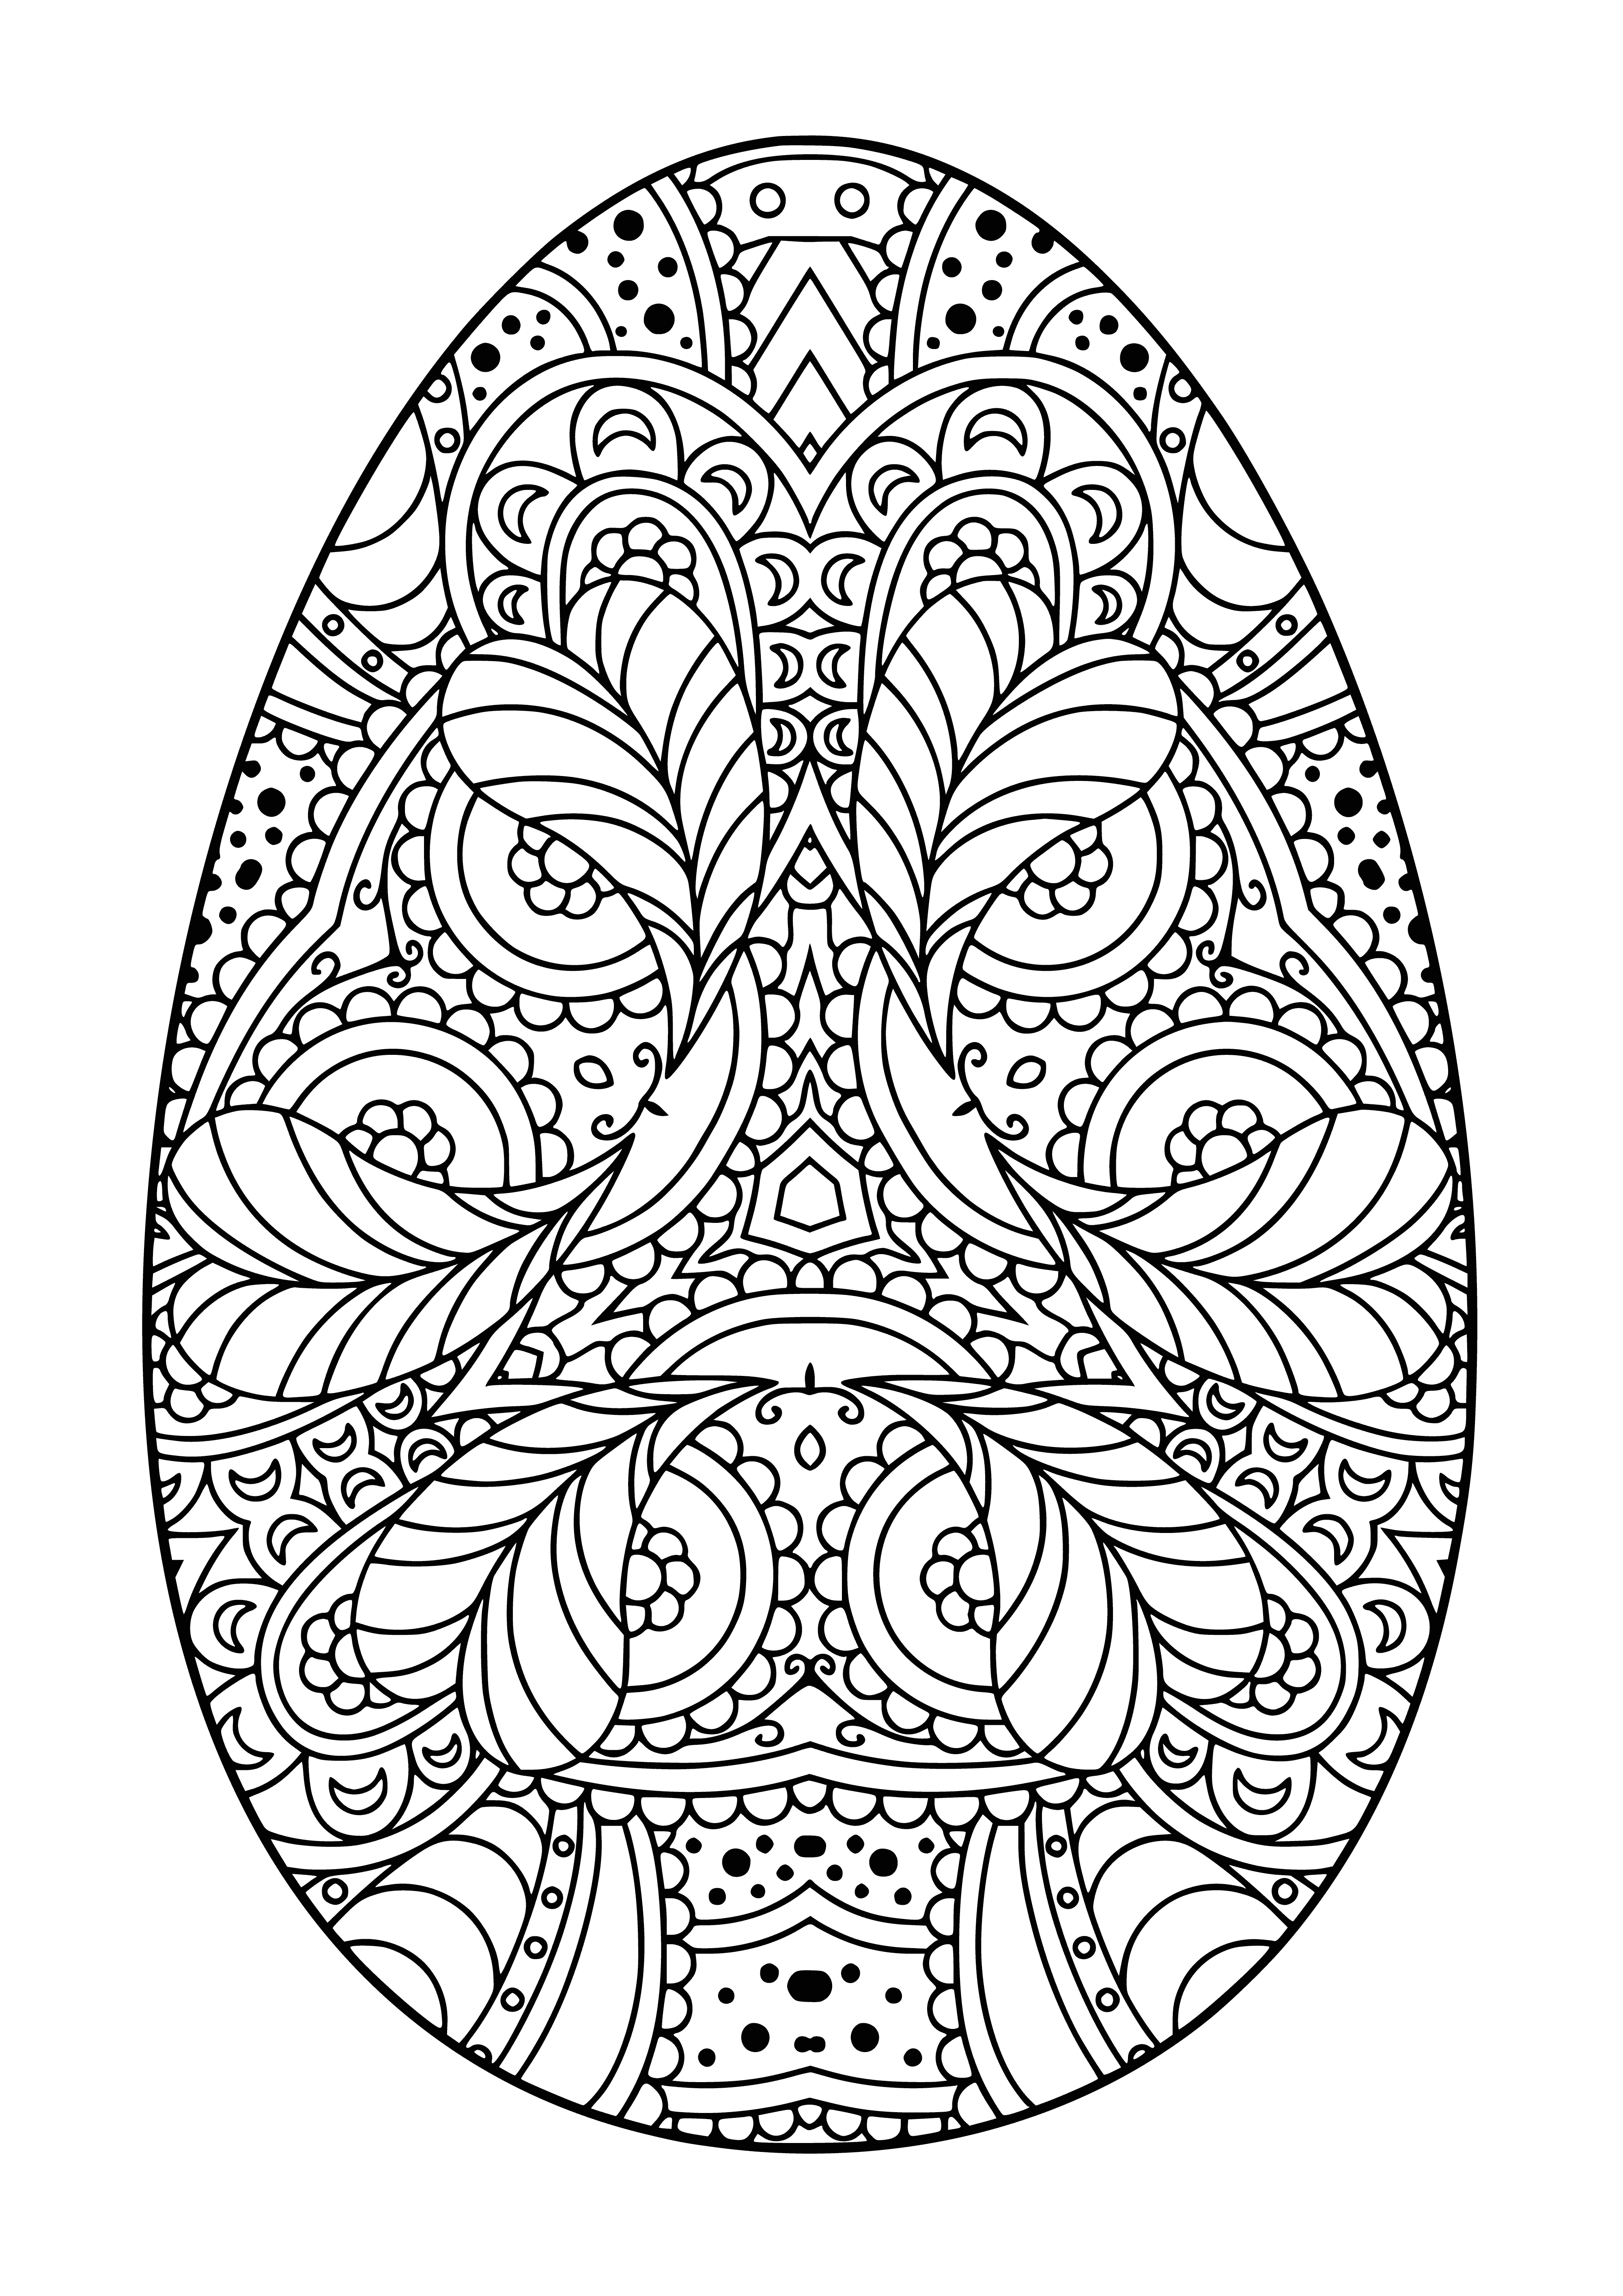 coloring page: Coloring pages of plain & decorated Easter eggs with people & animals. #Easter